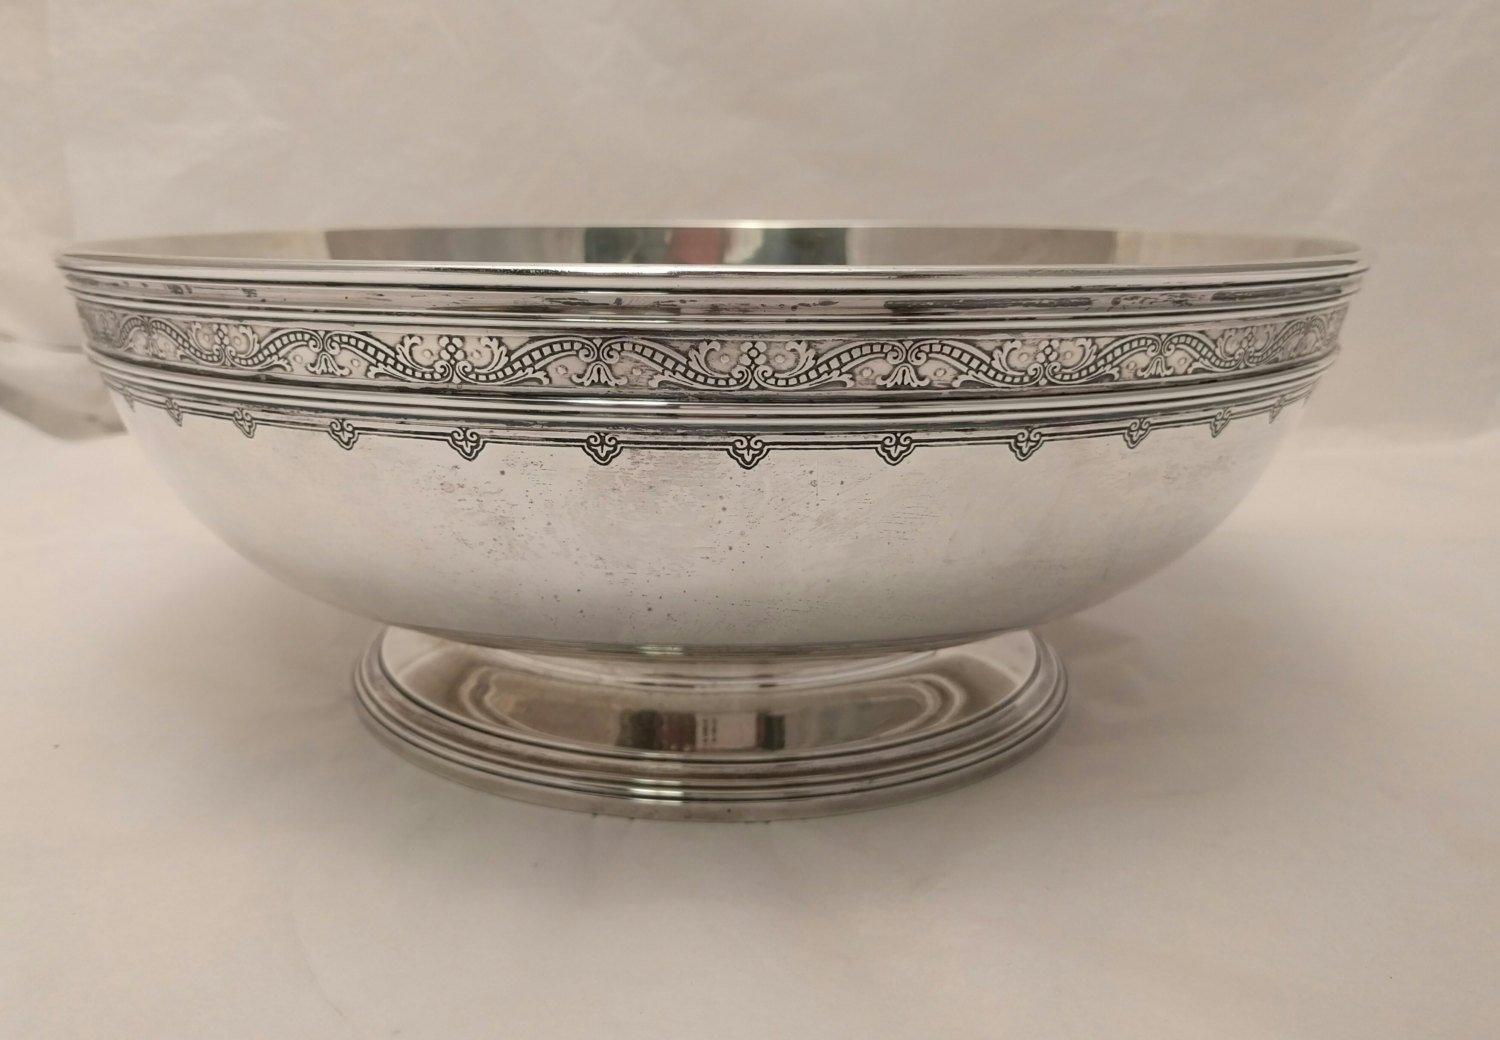 Tiffany & Co. sterling silver centerpiece bowl from 1914 in desirable Art Deco style. Measures: Diameter 12 inches, 4.5 inches in height. Approximately 48 ounces. Bears hallmarks as shown.

Founded in 1837 by Charles Lewis Tiffany and John B.